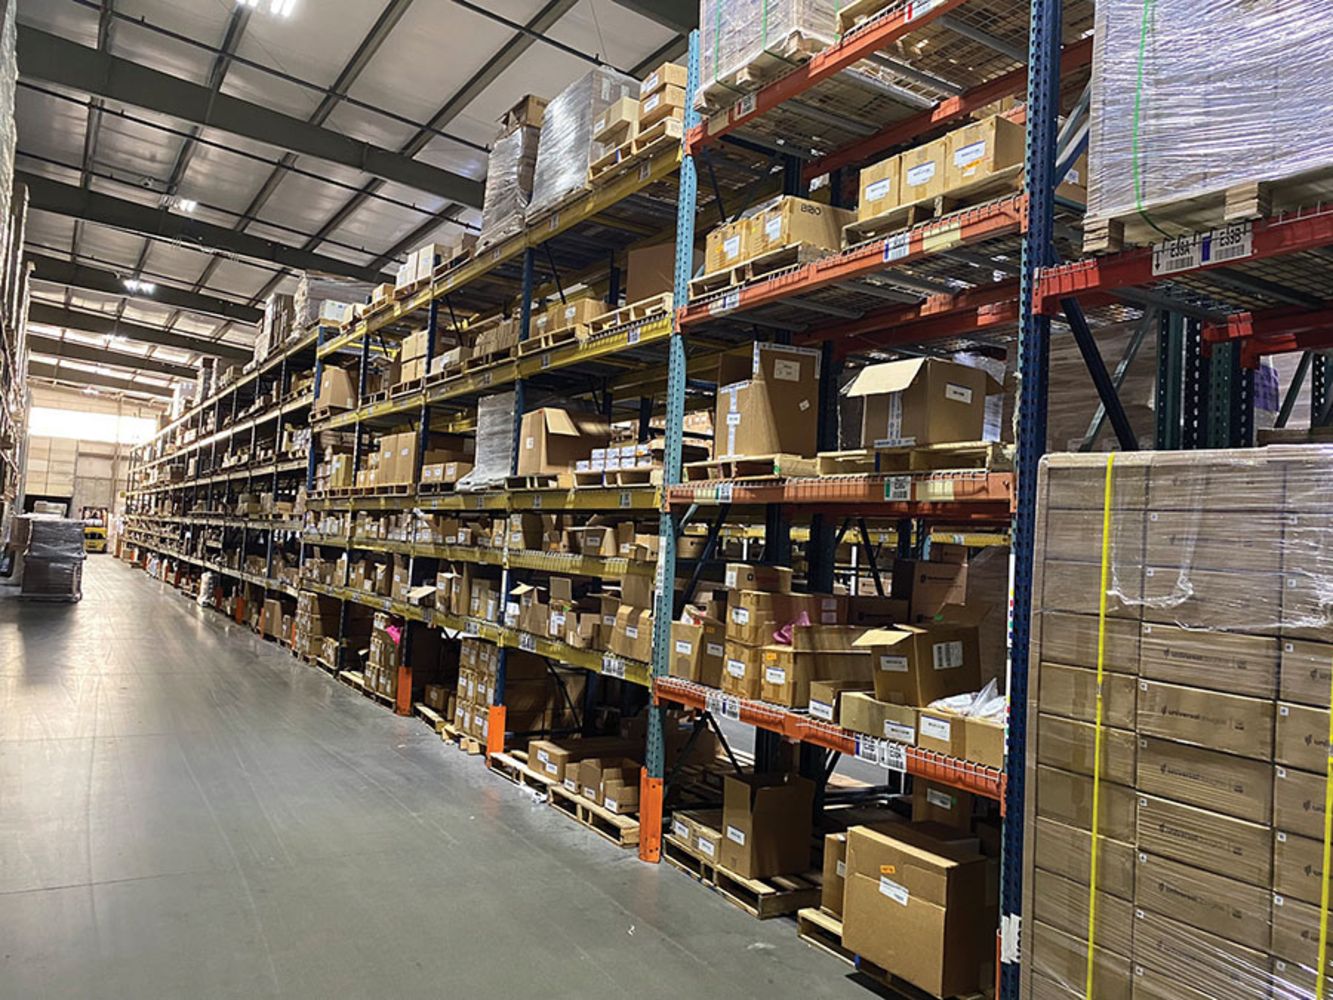 Universal Douglas Lighting Americas, Inc. - DAY 2 - $8,000,000 Industrial Lighting Controls, Fixtures, and Systems Inventory